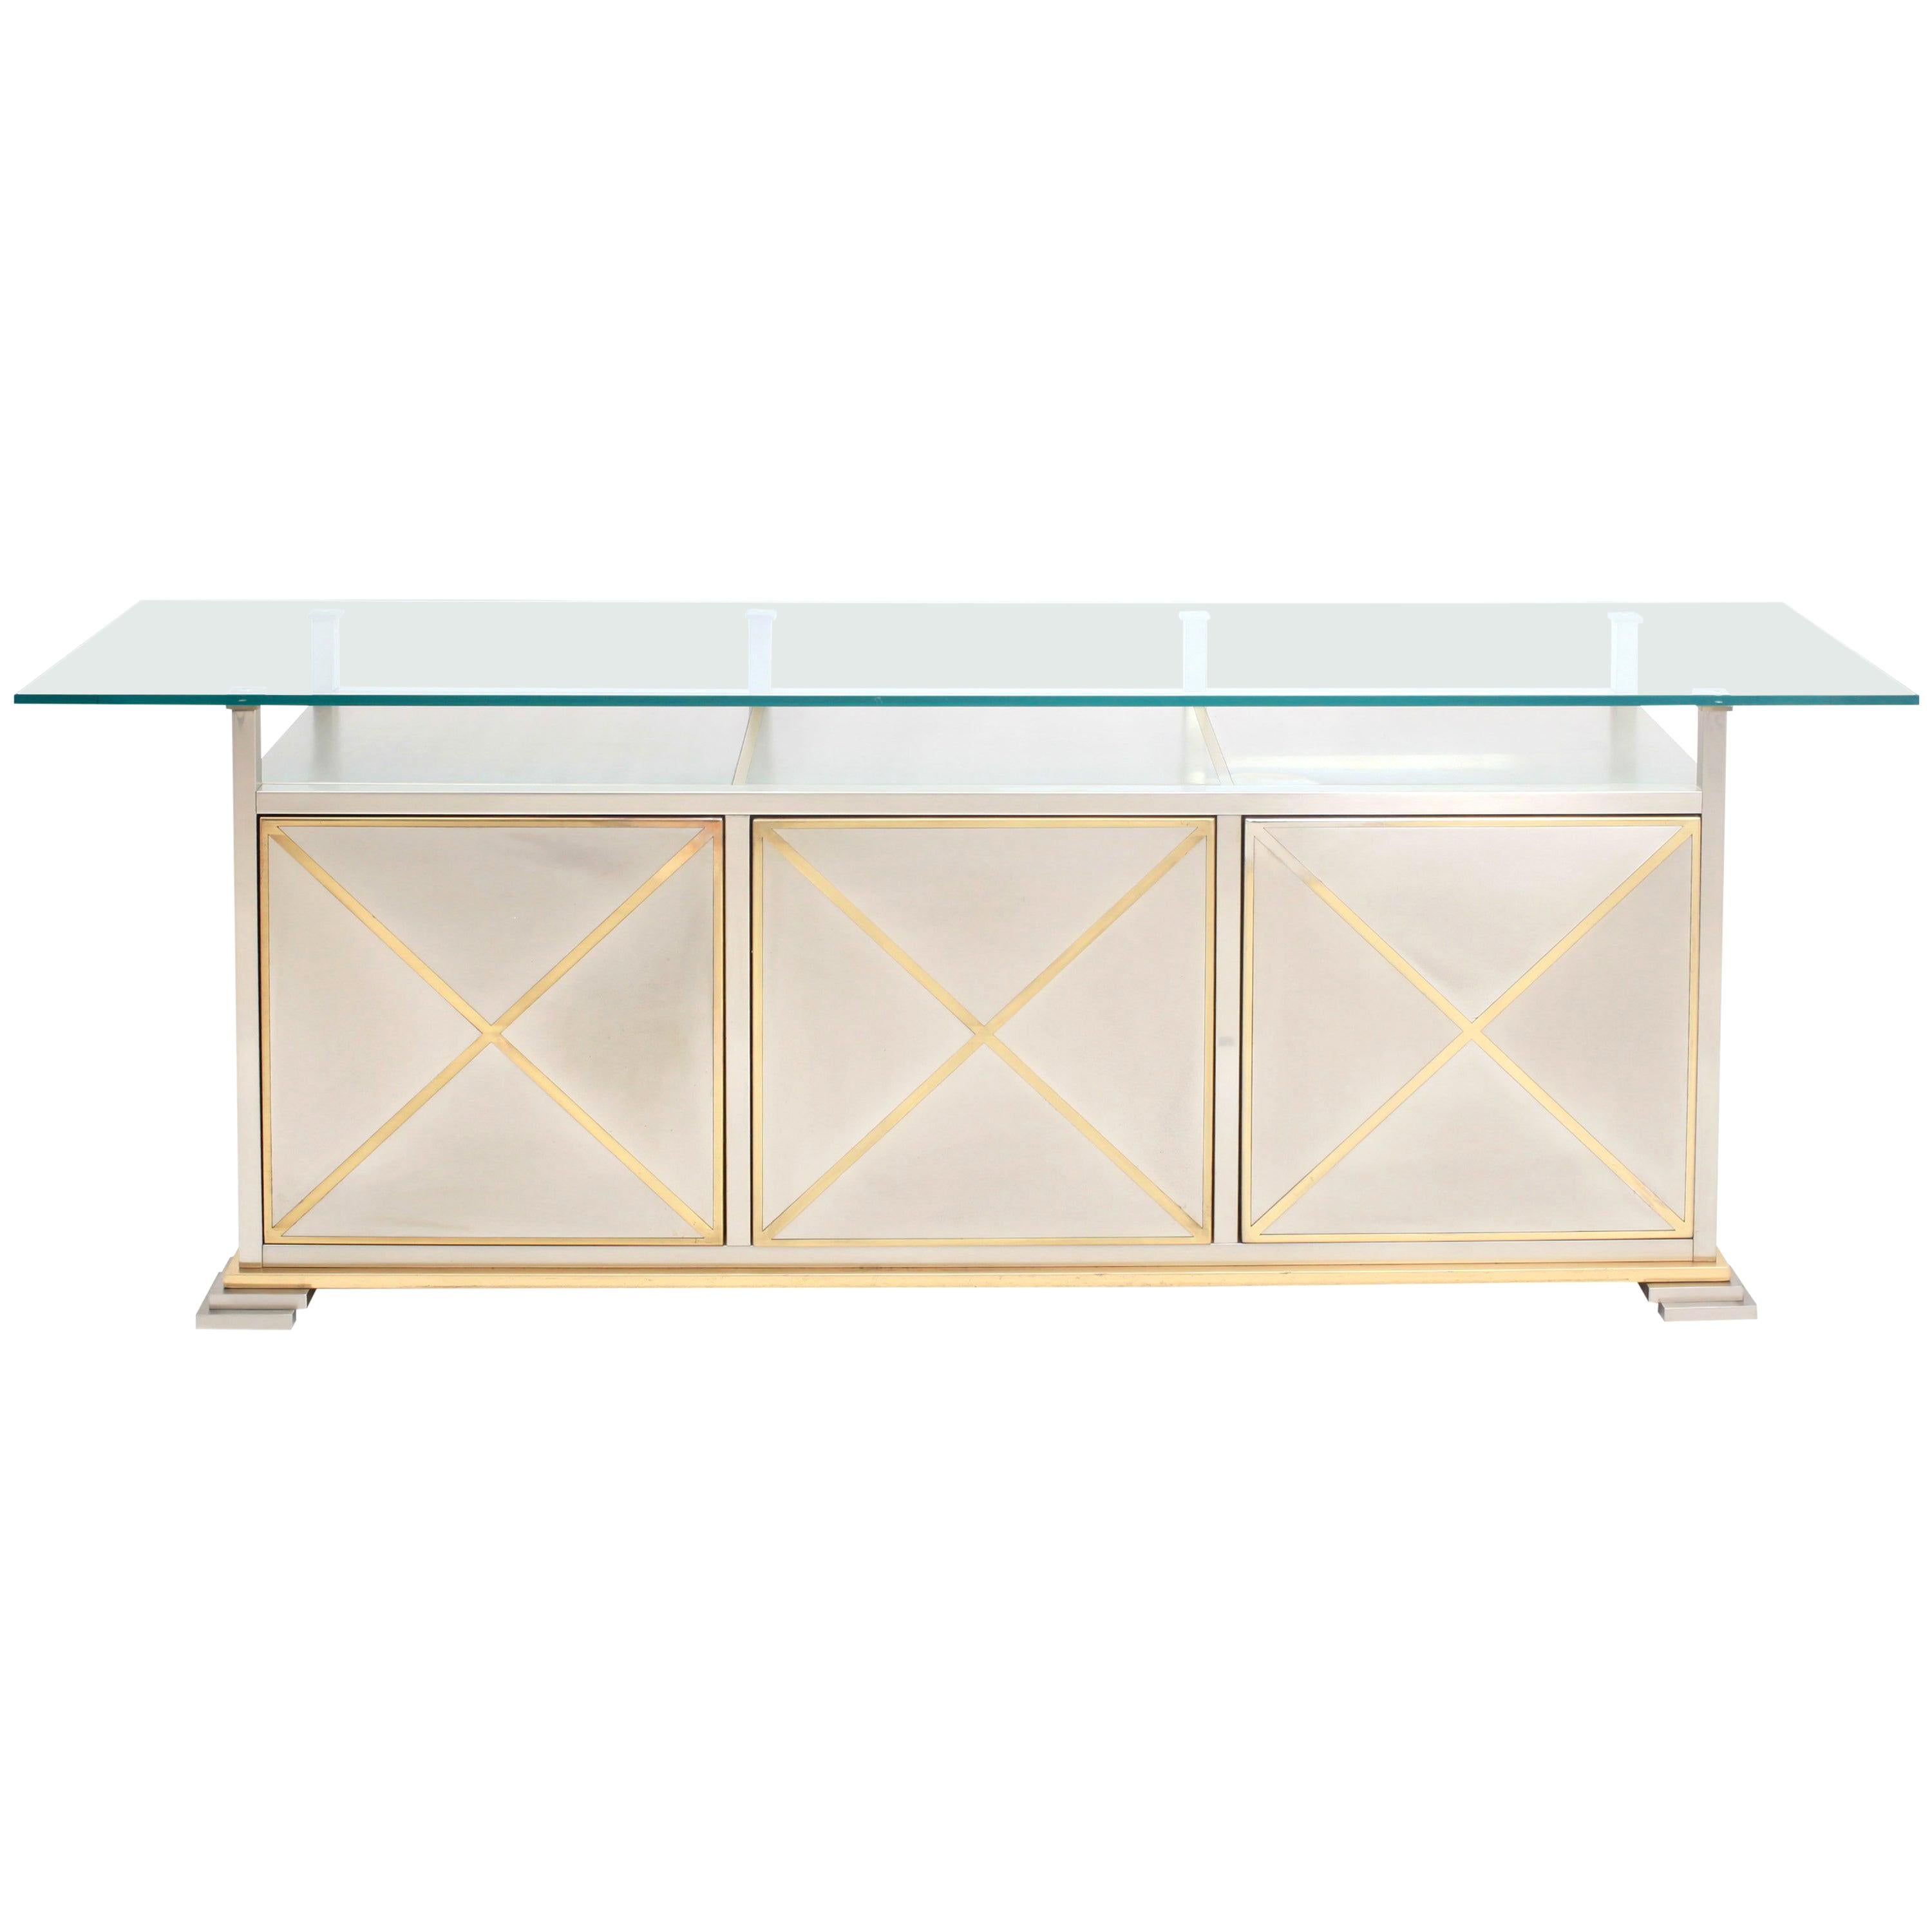 Hollywood Regency brass and steel sideboard with clear glass top and diamond patterned doors.
 
Maison Jansen, France, 1970s

Check out our Goldwood storefront for more matching pieces

Measure: L 230 cm x H 82 cm x D 52 cm.